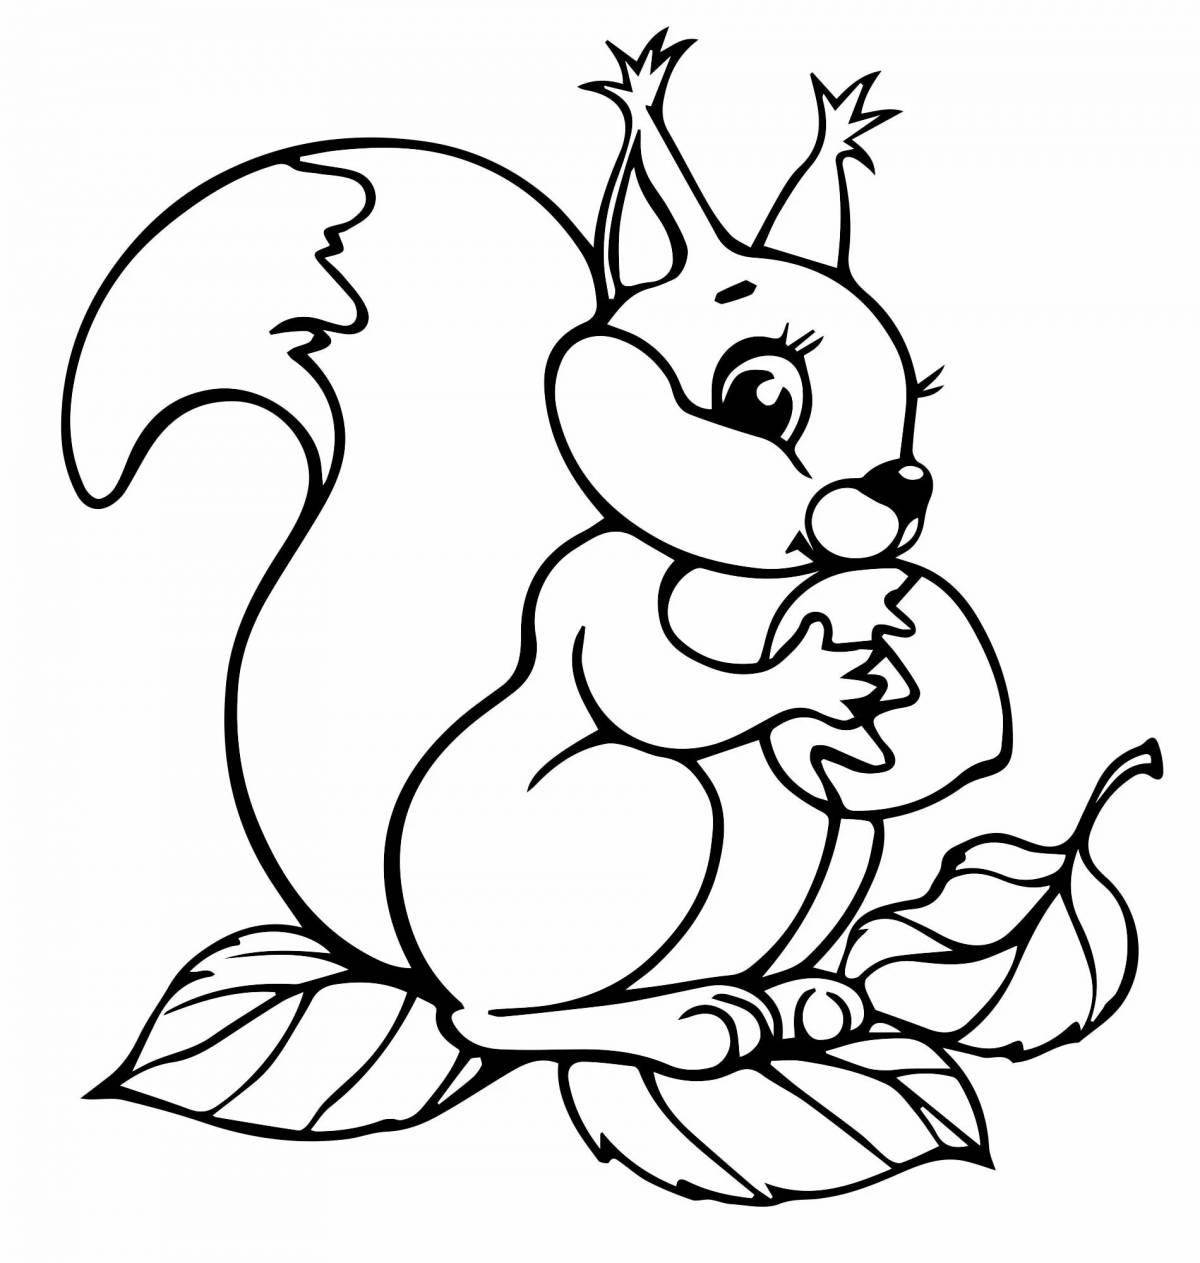 Fun squirrel coloring book for 4-5 year olds